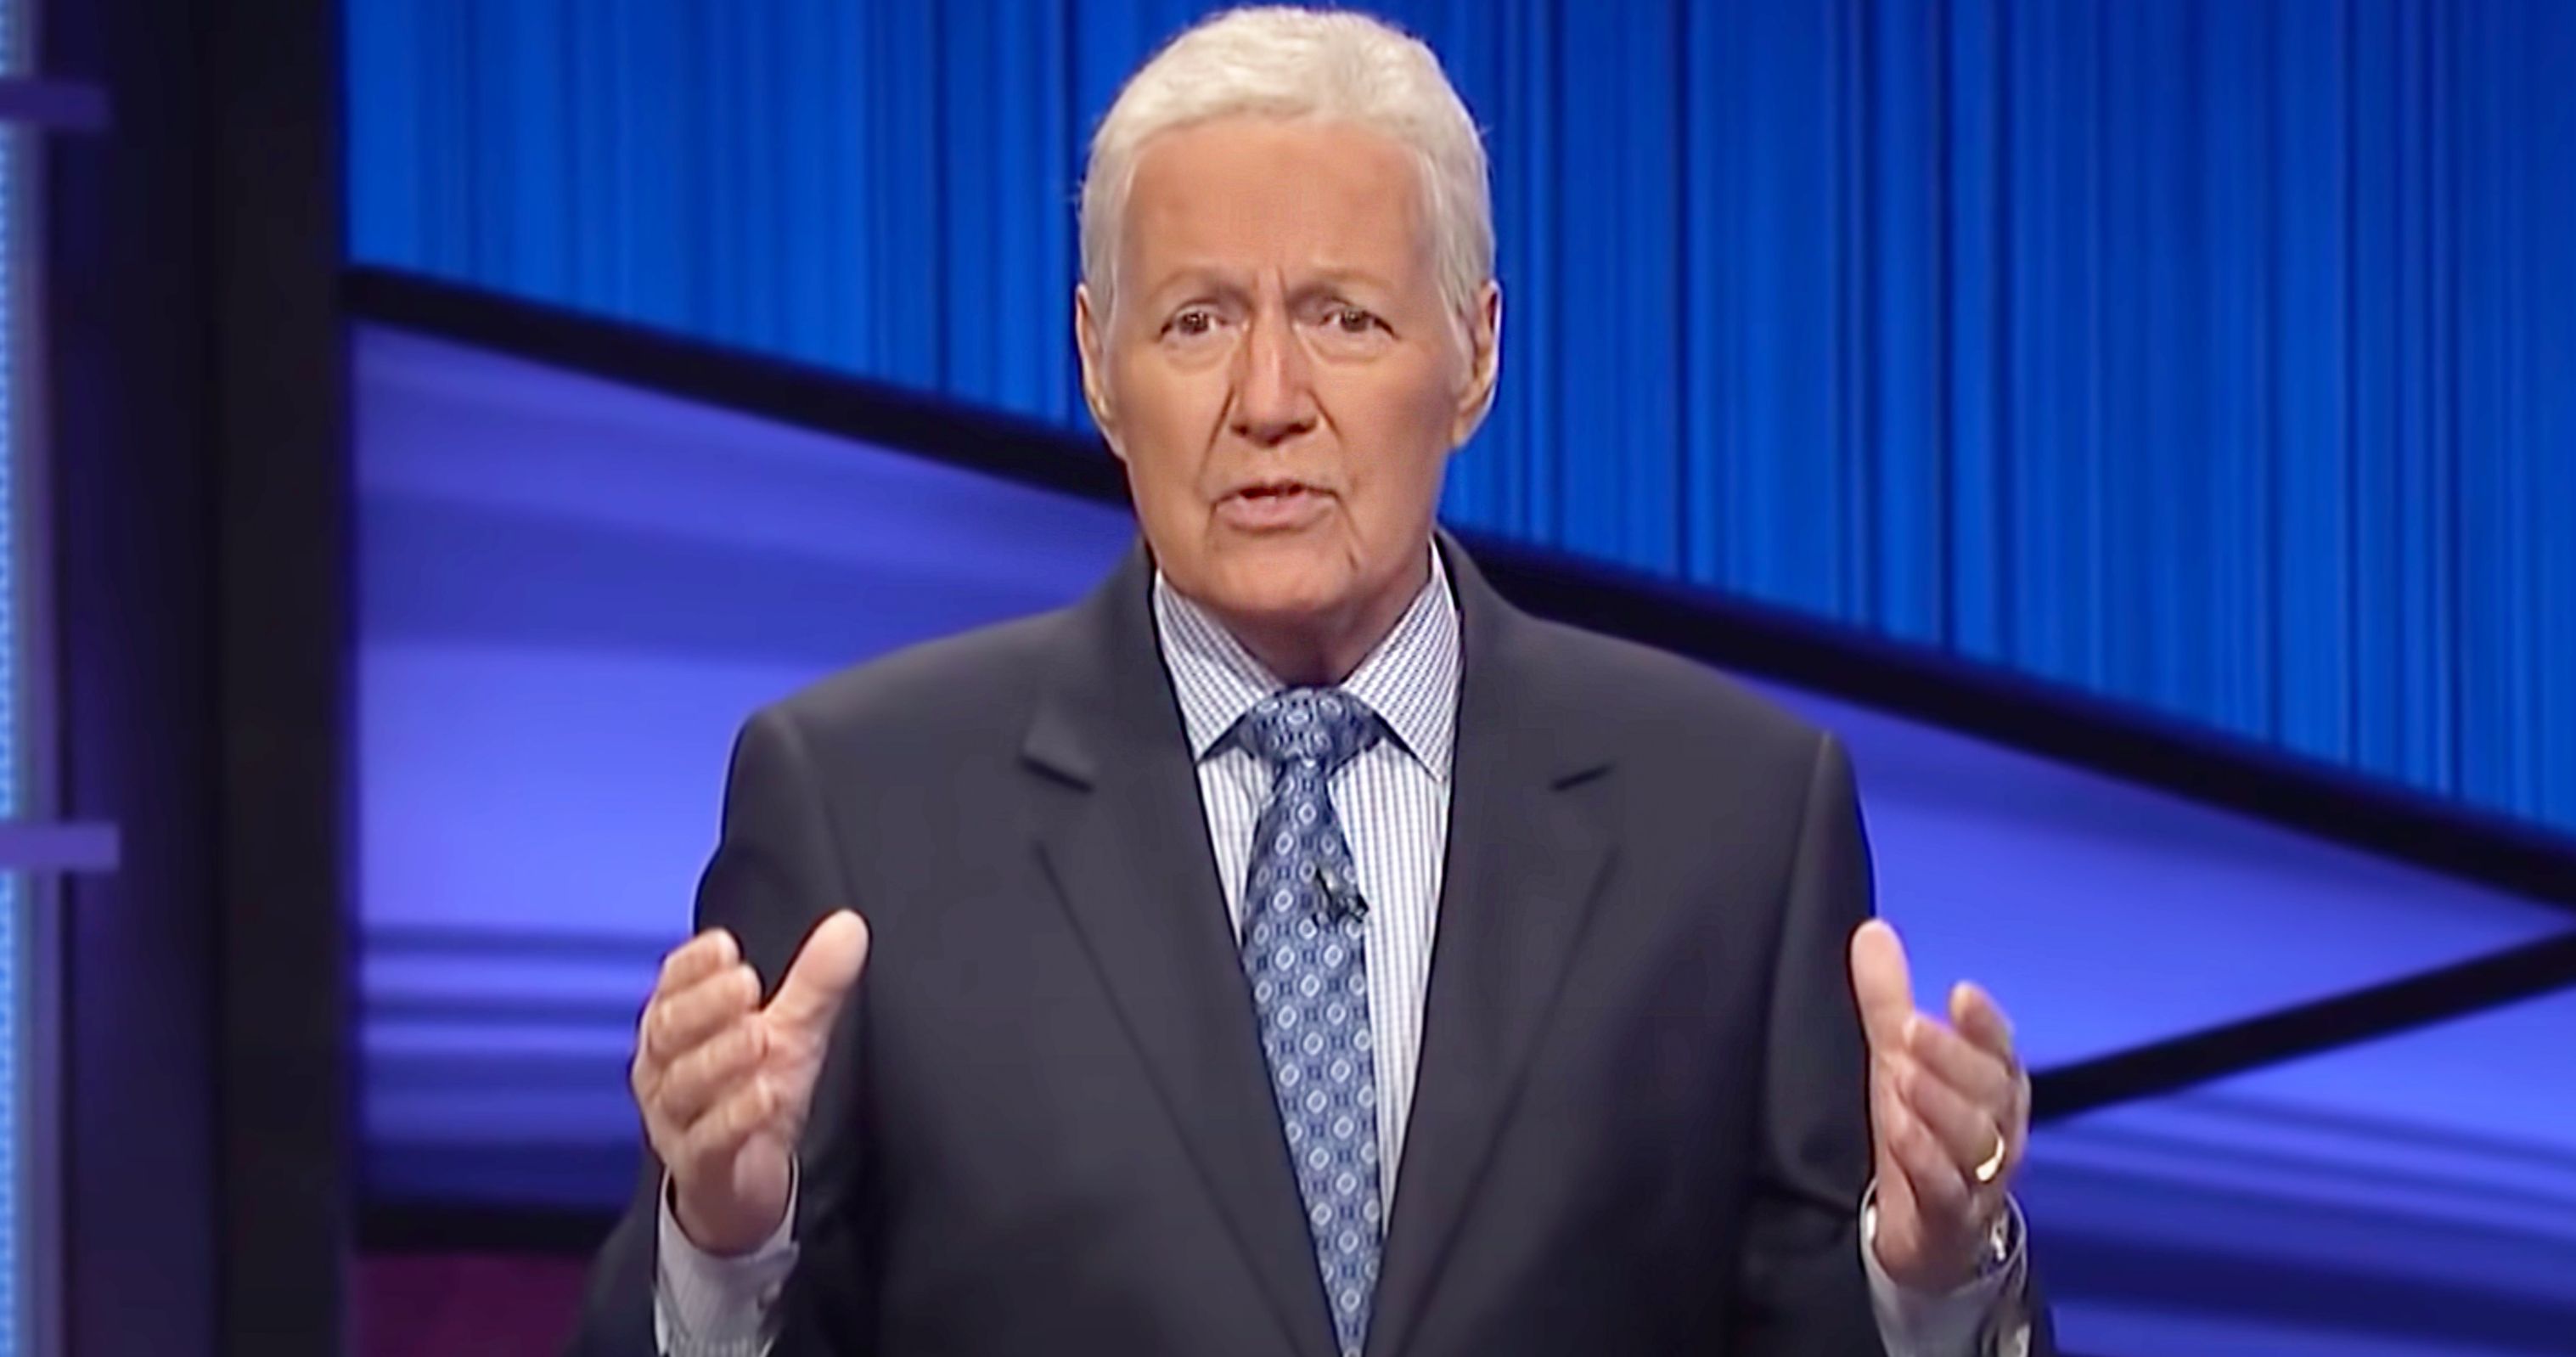 Alex Trebek's Final Season of Jeopardy! Wins Daytime Emmy Award for Outstanding Game Show